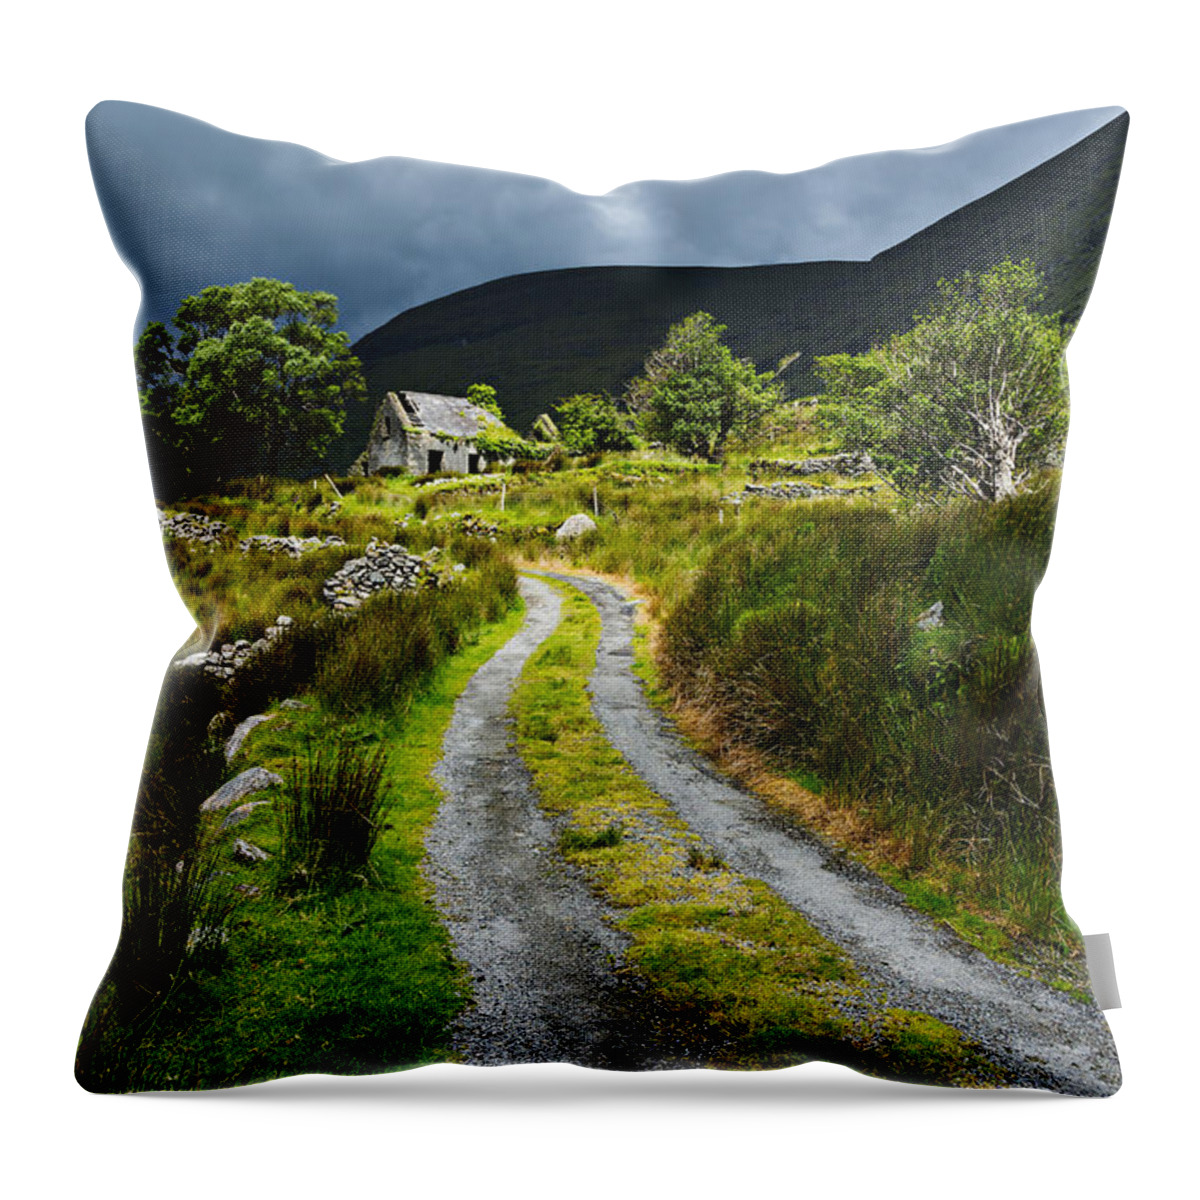 Ireland Throw Pillow featuring the photograph Shepherd's Delight by Dan McGeorge